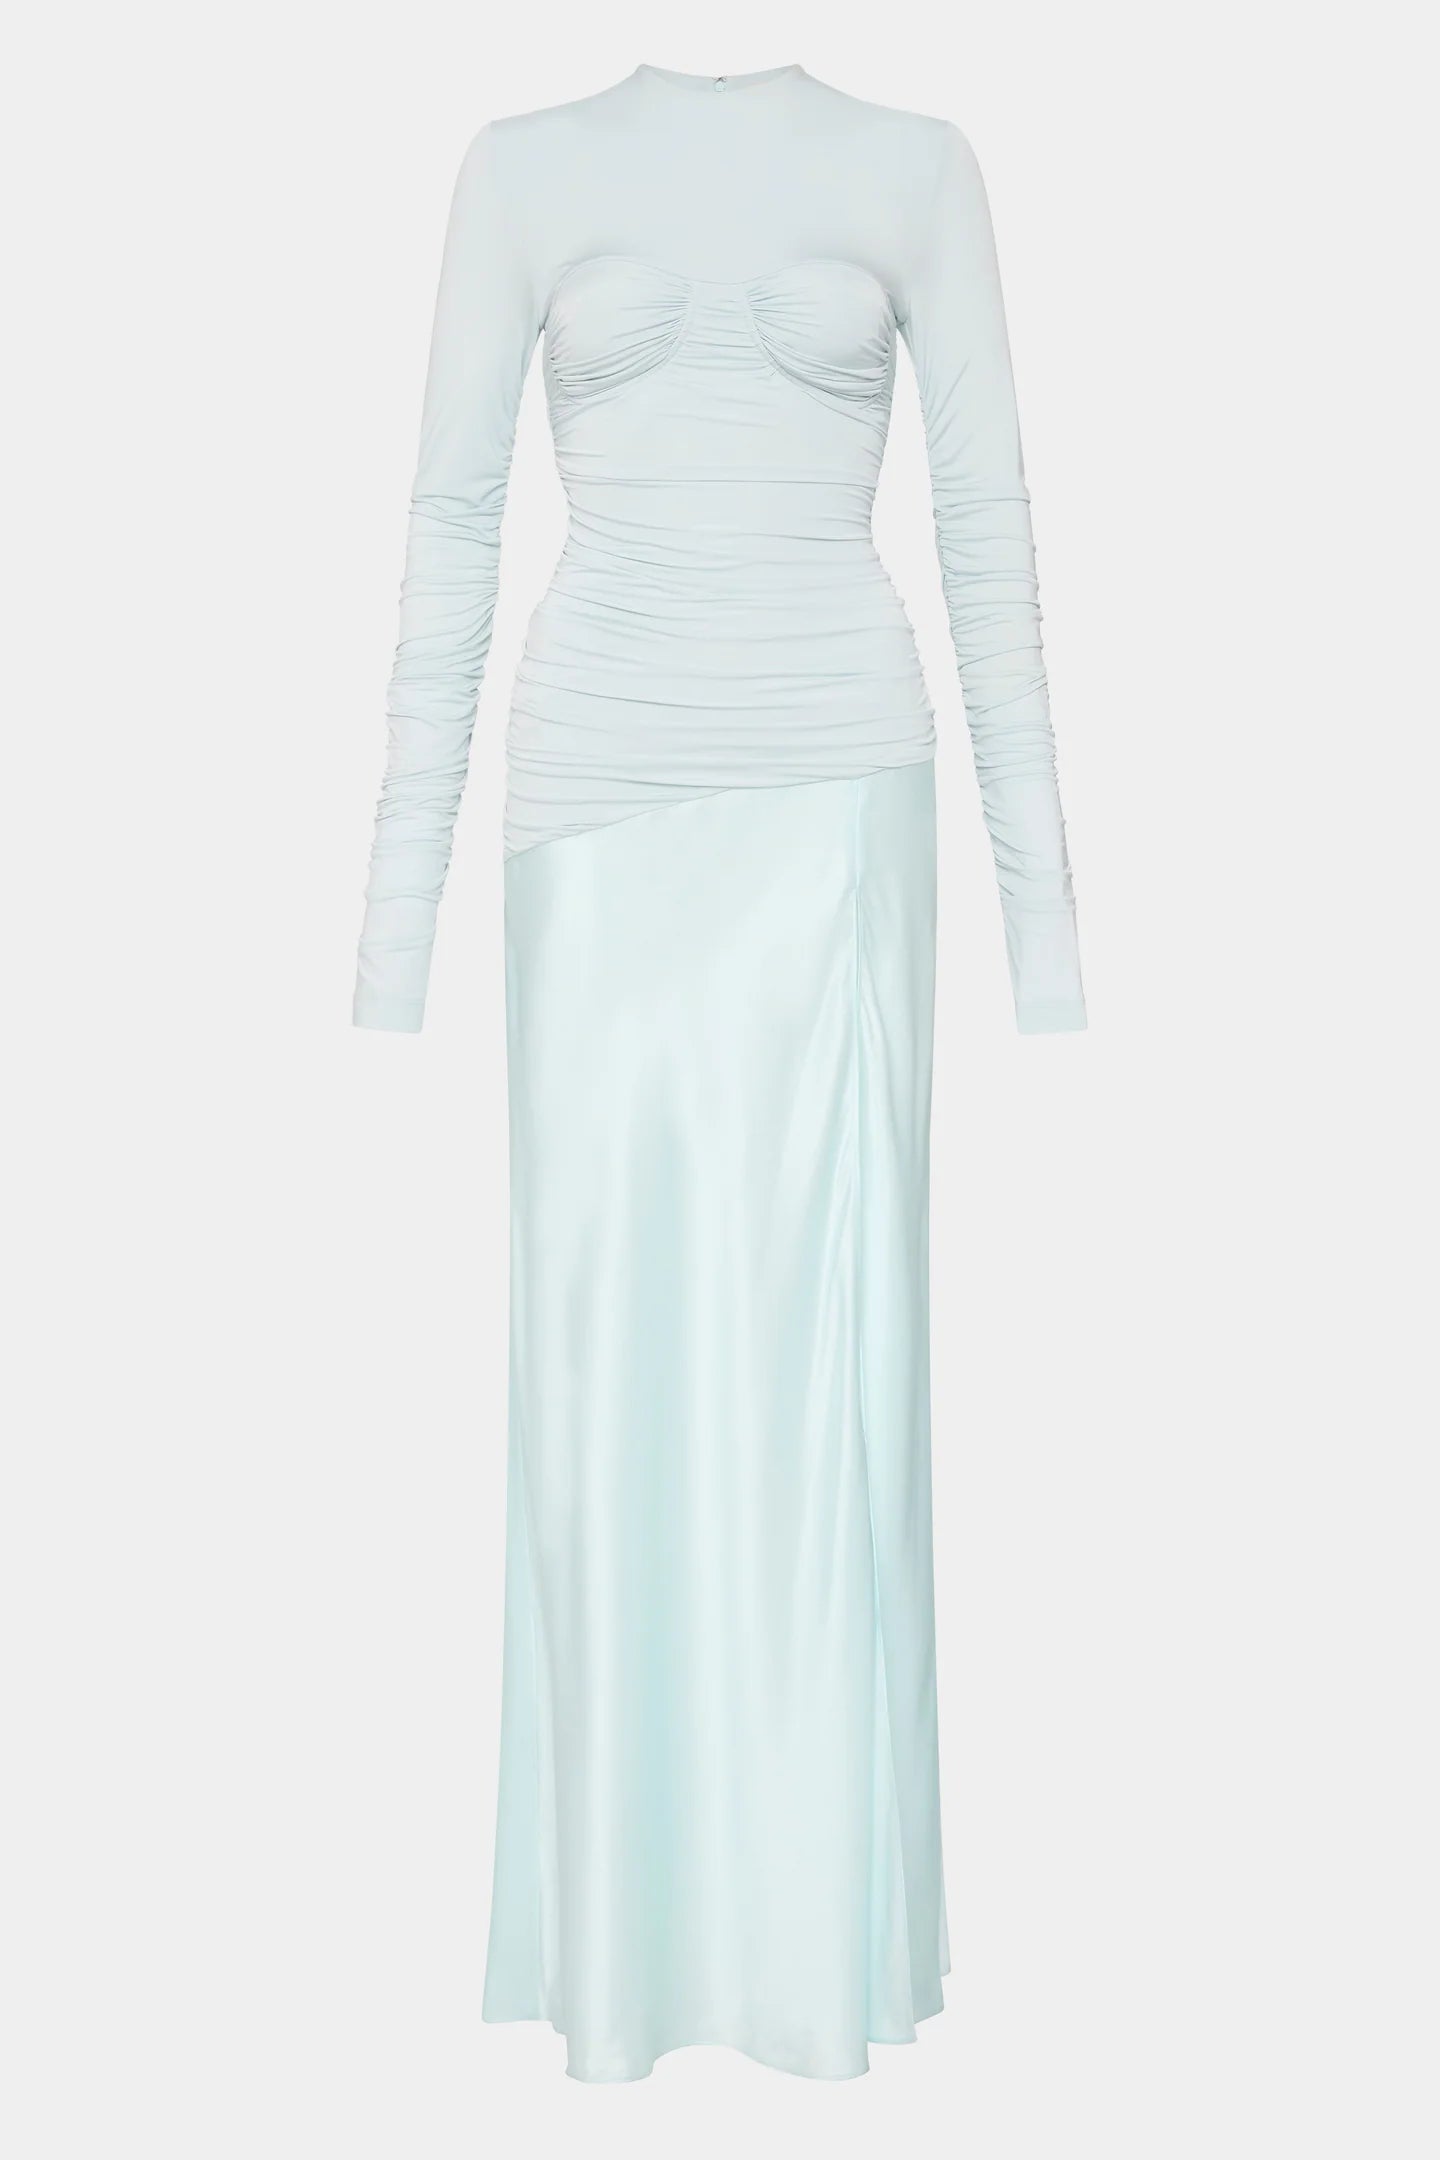 SIR. Alessia Draped Gown - Ice Blue